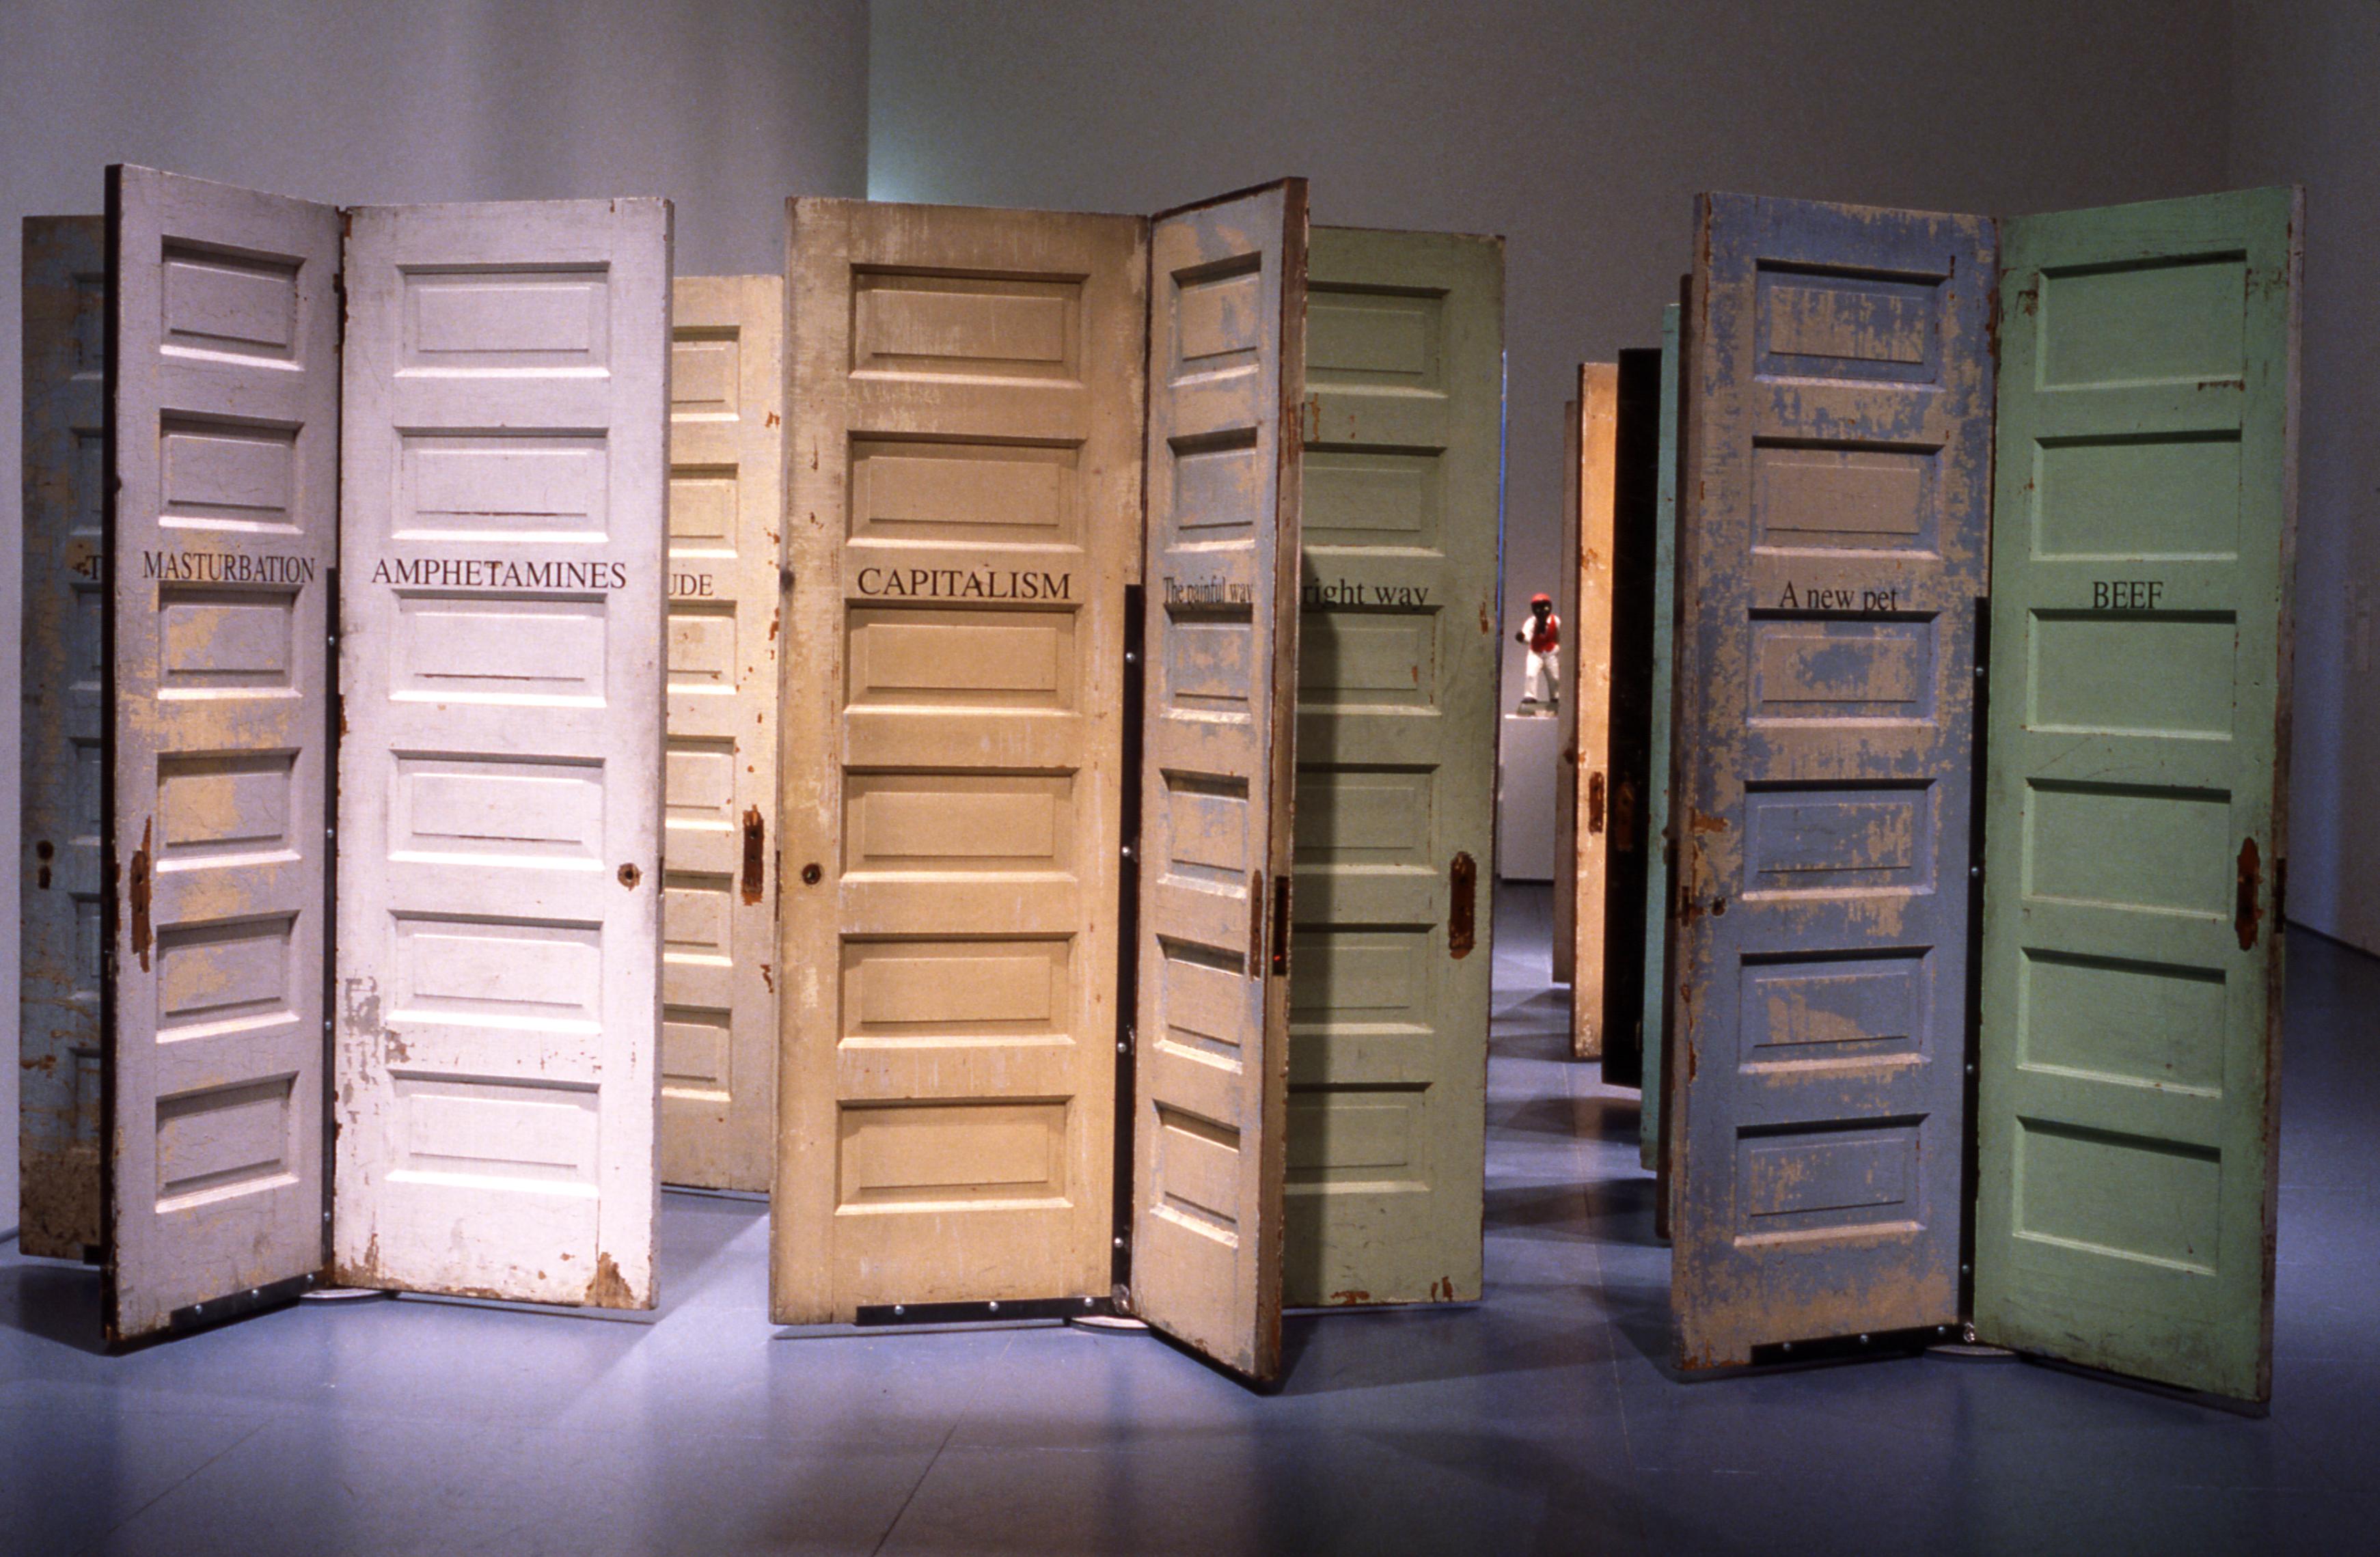 A cluster of pastel-colored doors with peeling paint. Each is labeled with a one-word term, including, "MASTURBATION," "AMPHETAMINES," "CAPITALISM," "BEEF," and "A New Pet."